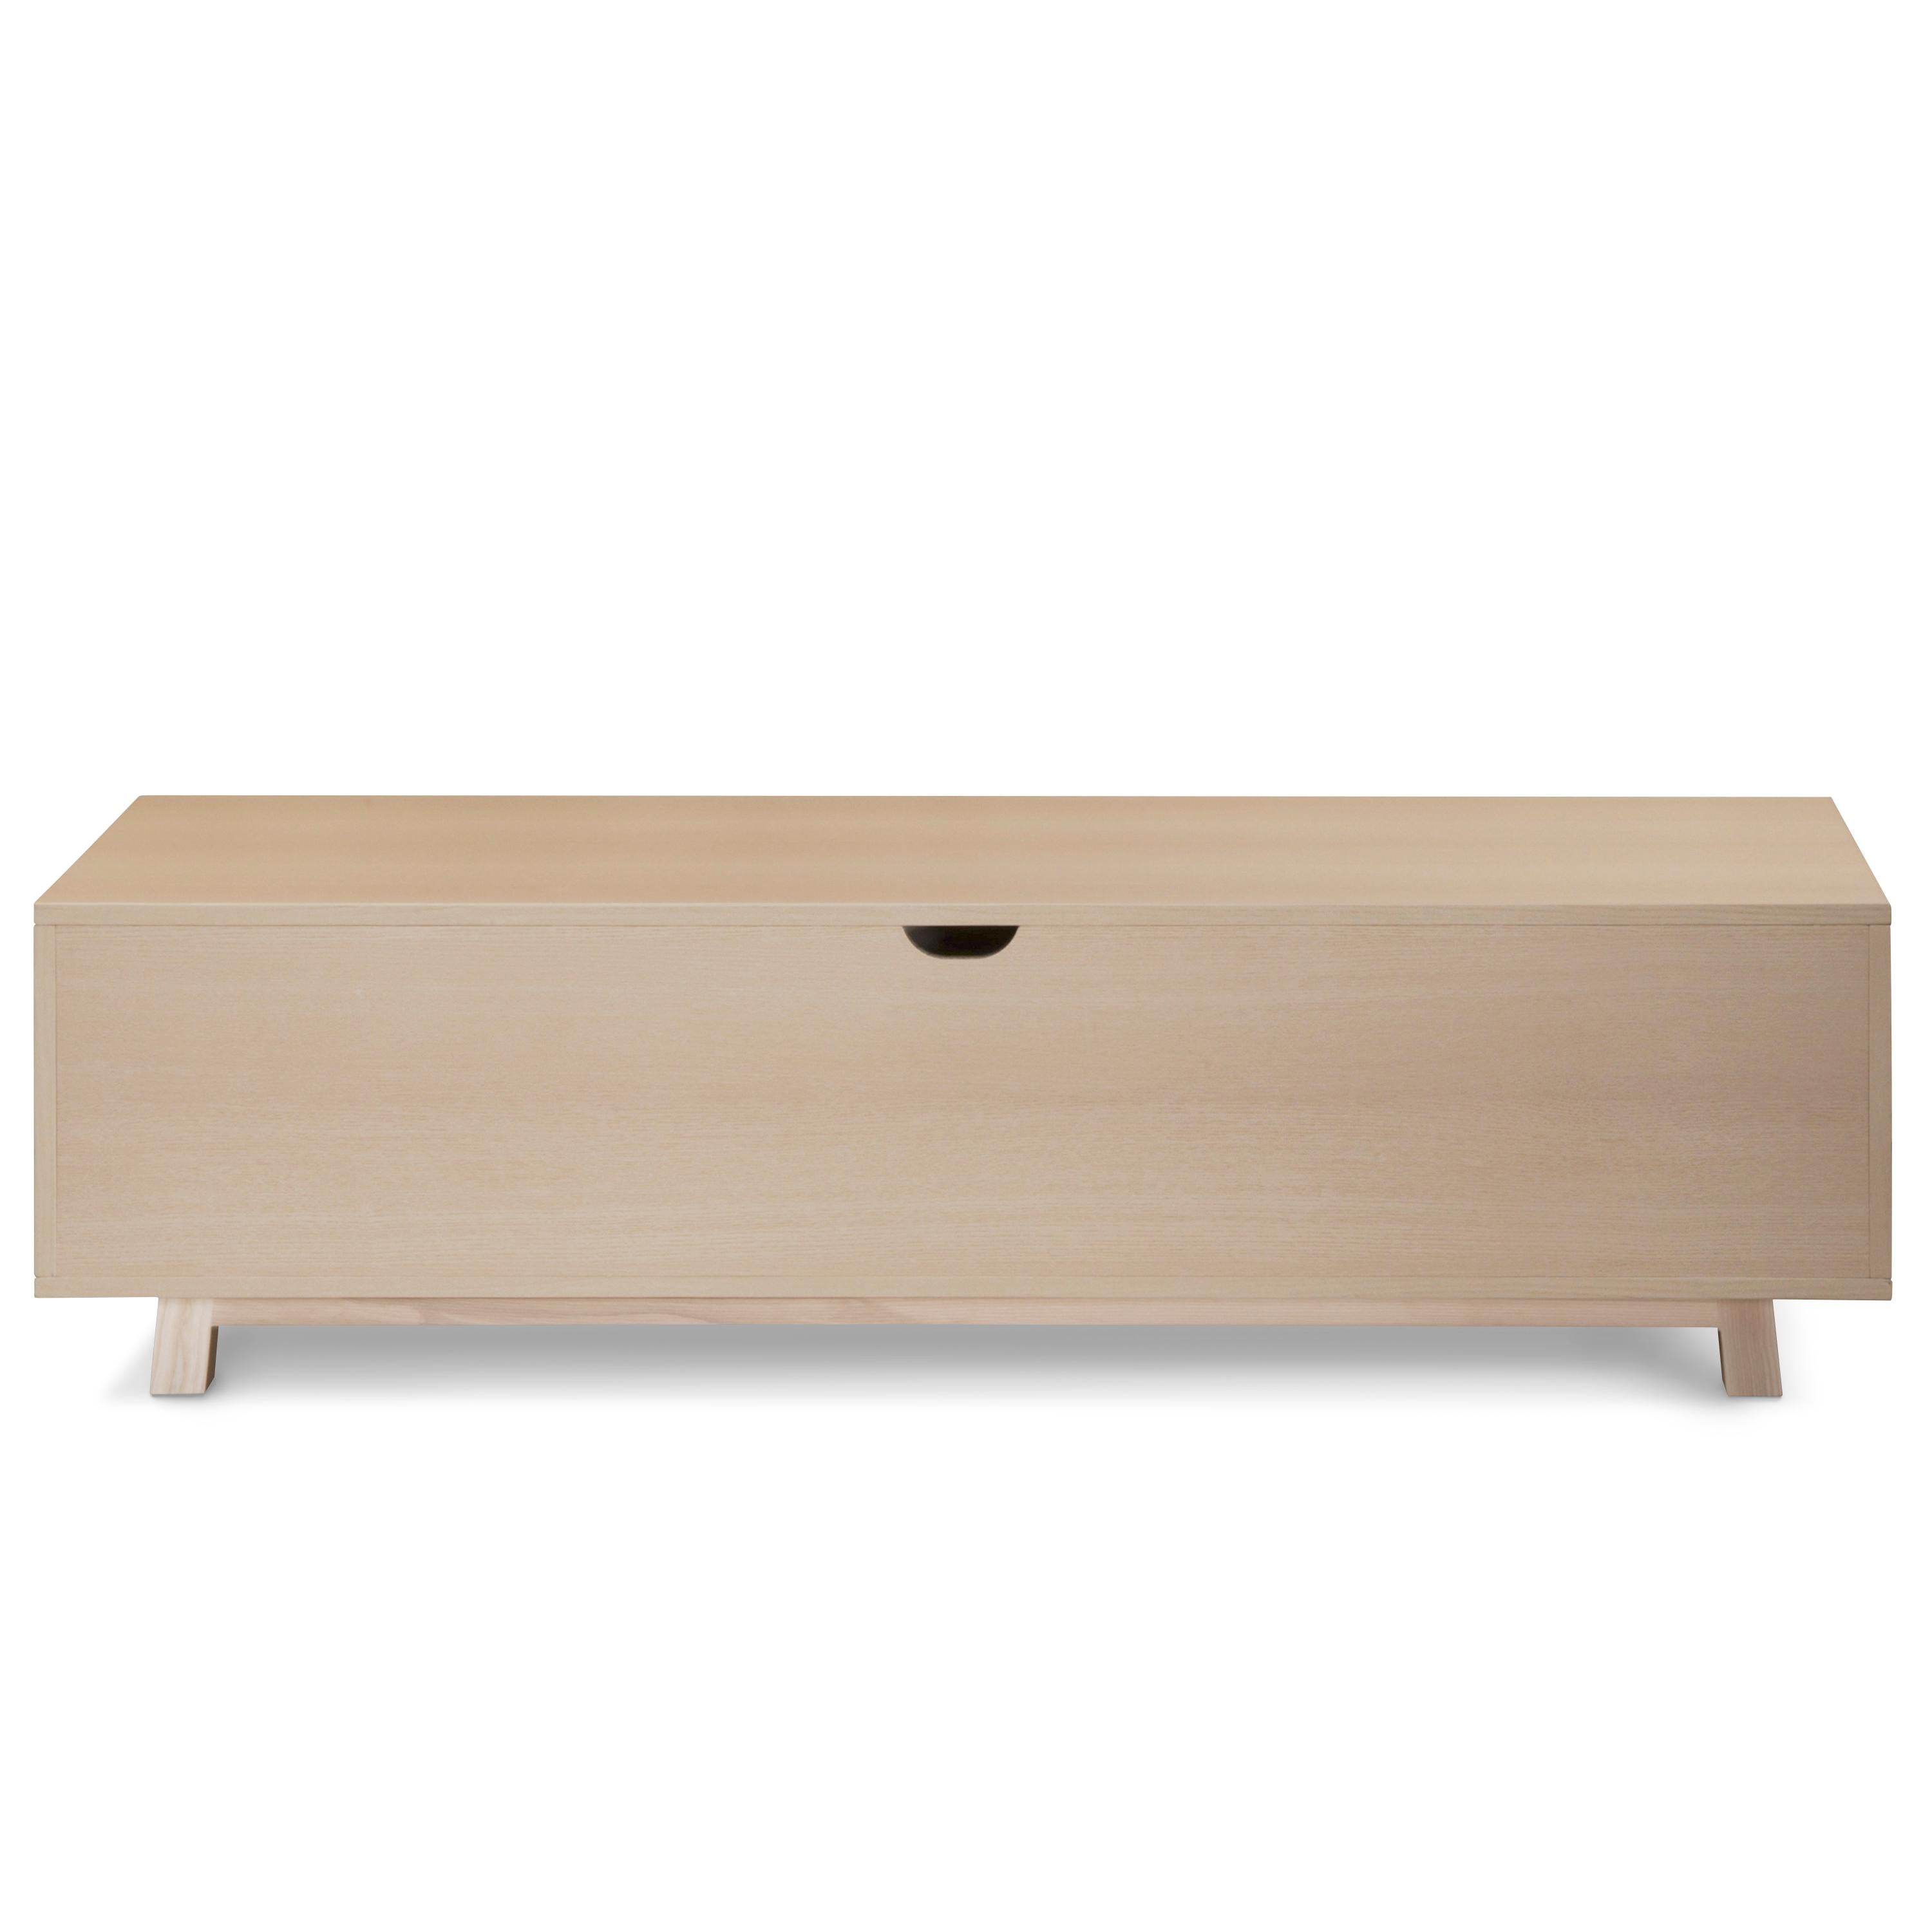 This TV stand with 2 sliding doors is designed by Eric Gizard - Paris.

It is 100% made in France with solid and veneer ash and lacquered MDF doors. 

To pull the door, use the round eyelet. 
2 adjustable wooden shelves on cleats are placed behind